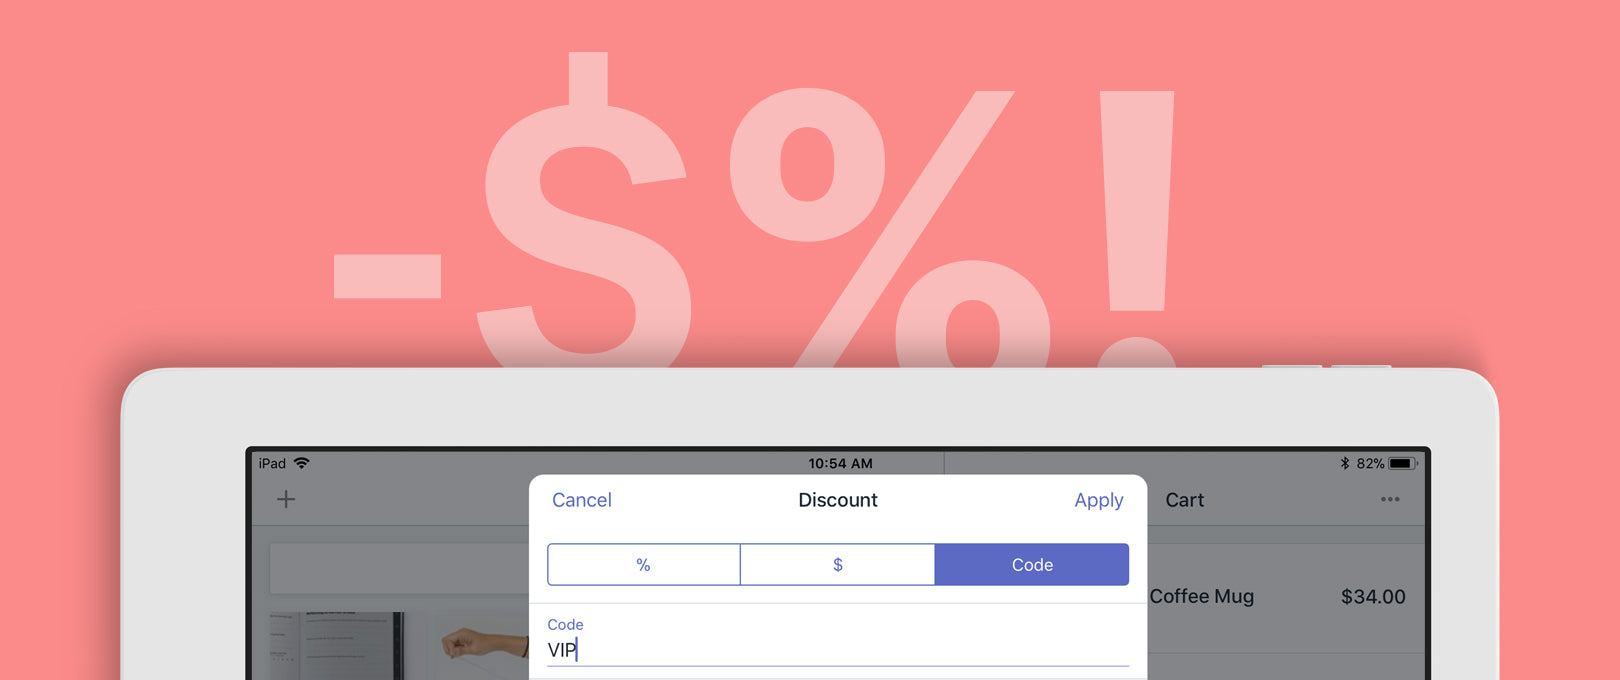 Discount Codes for Shopify POS | Shopify Retail blog